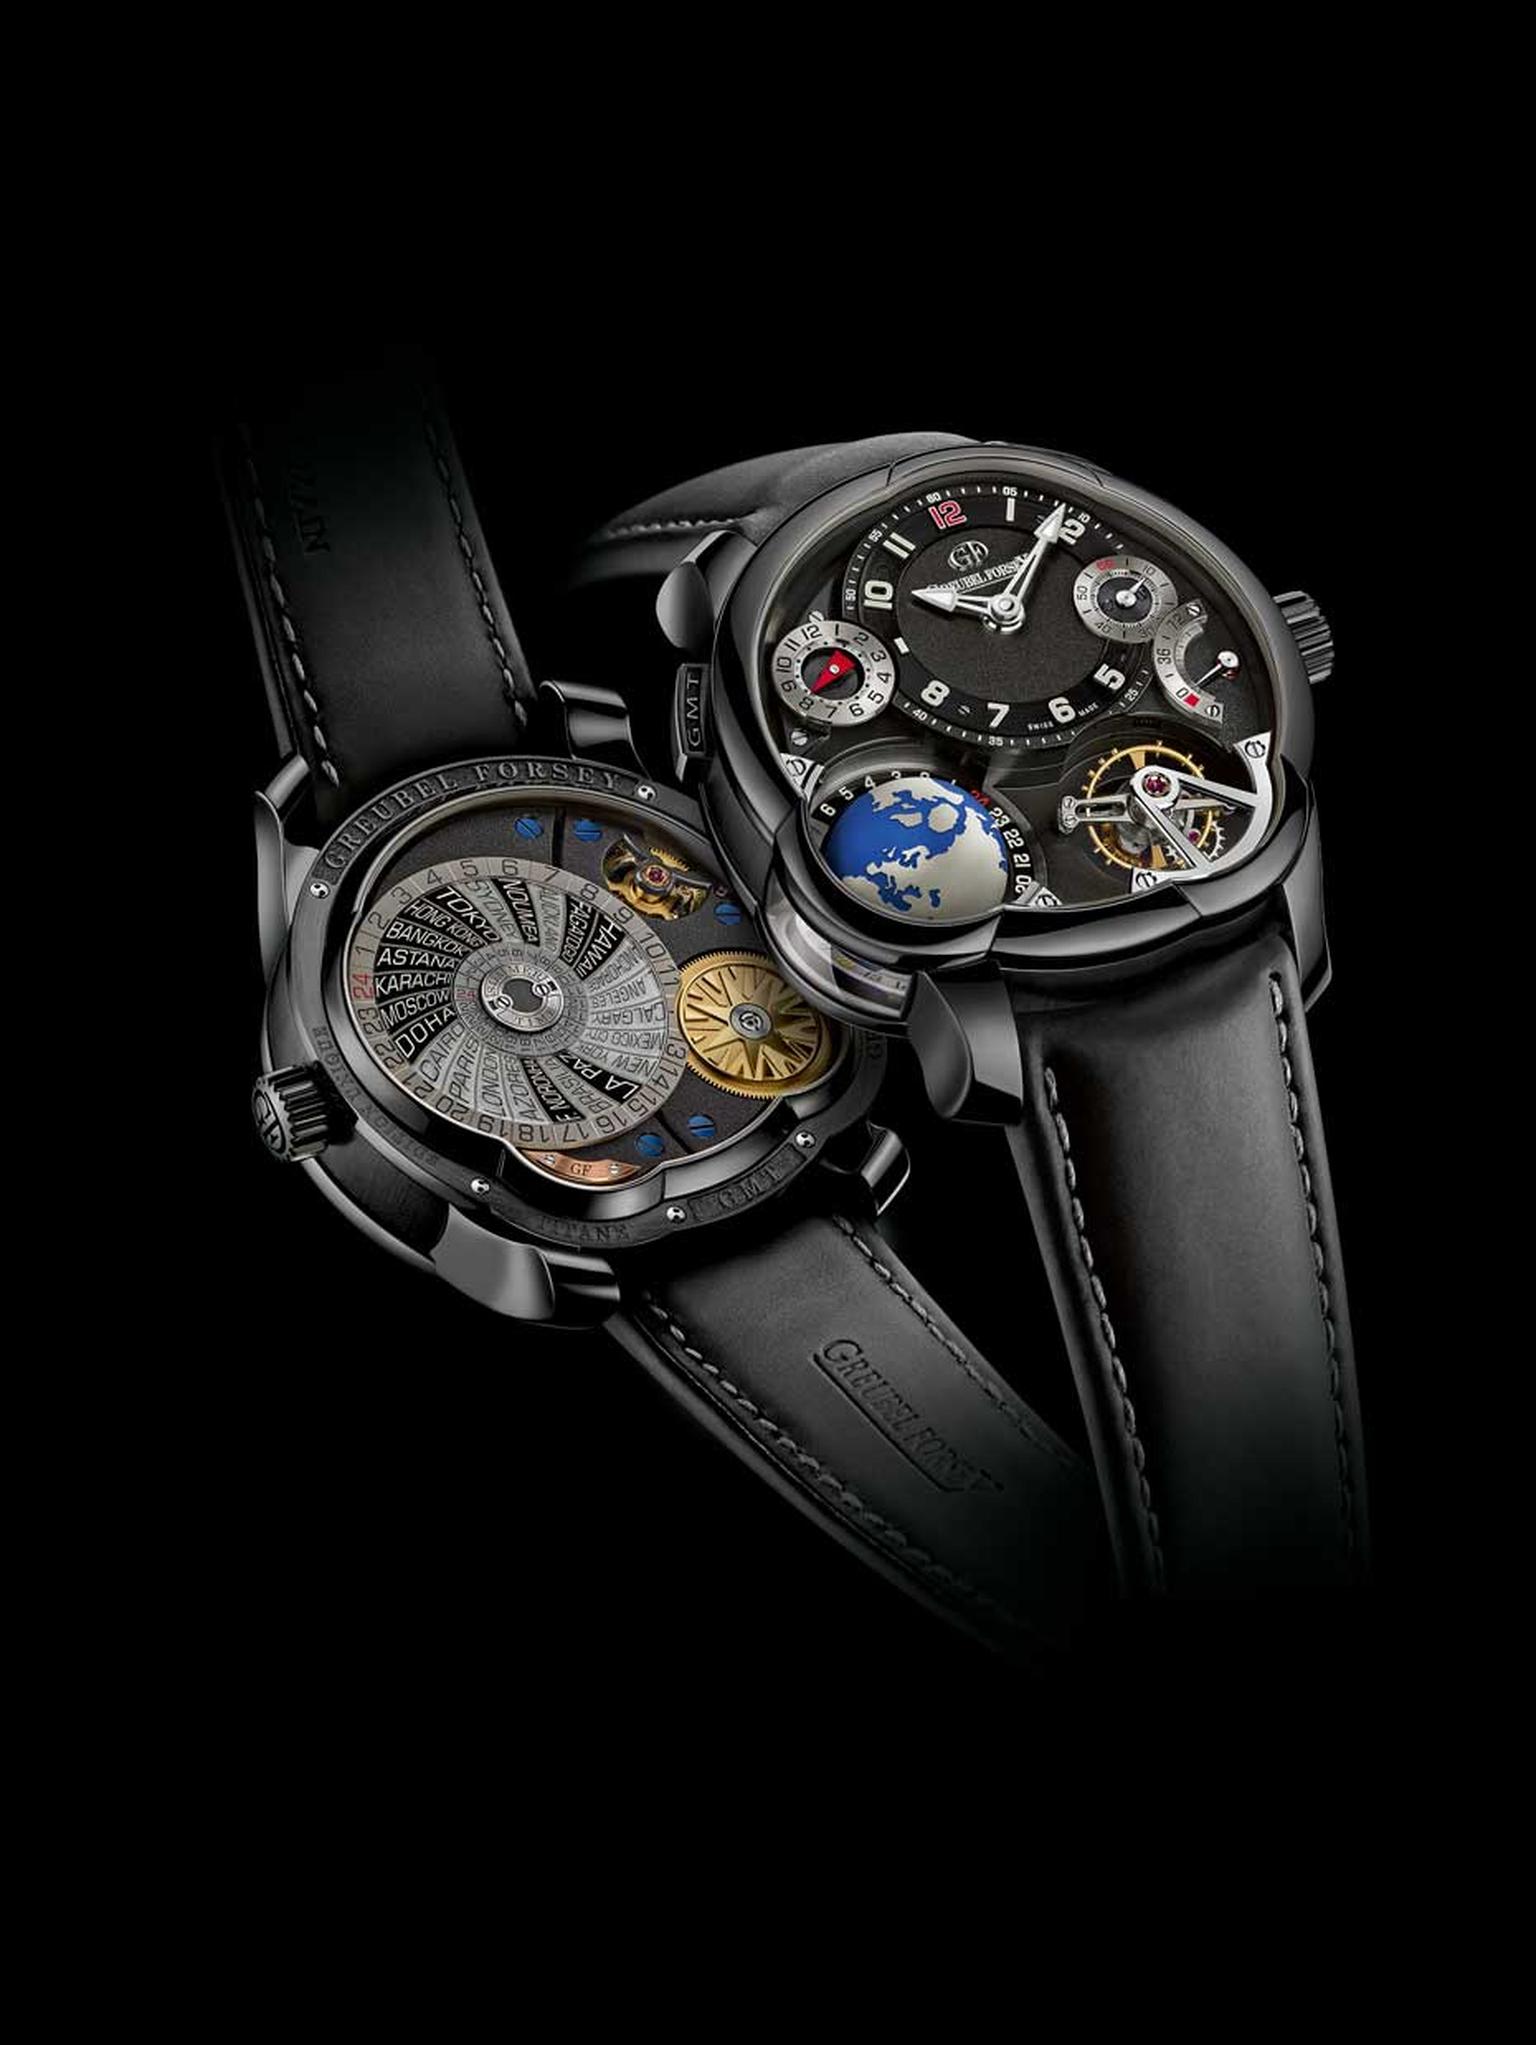 Greubel Forsey GMT watch with a rotating globe to display universal time, showing the time zones in 24 cities, day and night indicator, power reserve gauge, hour and minute display, summer time indicator and small seconds counter.